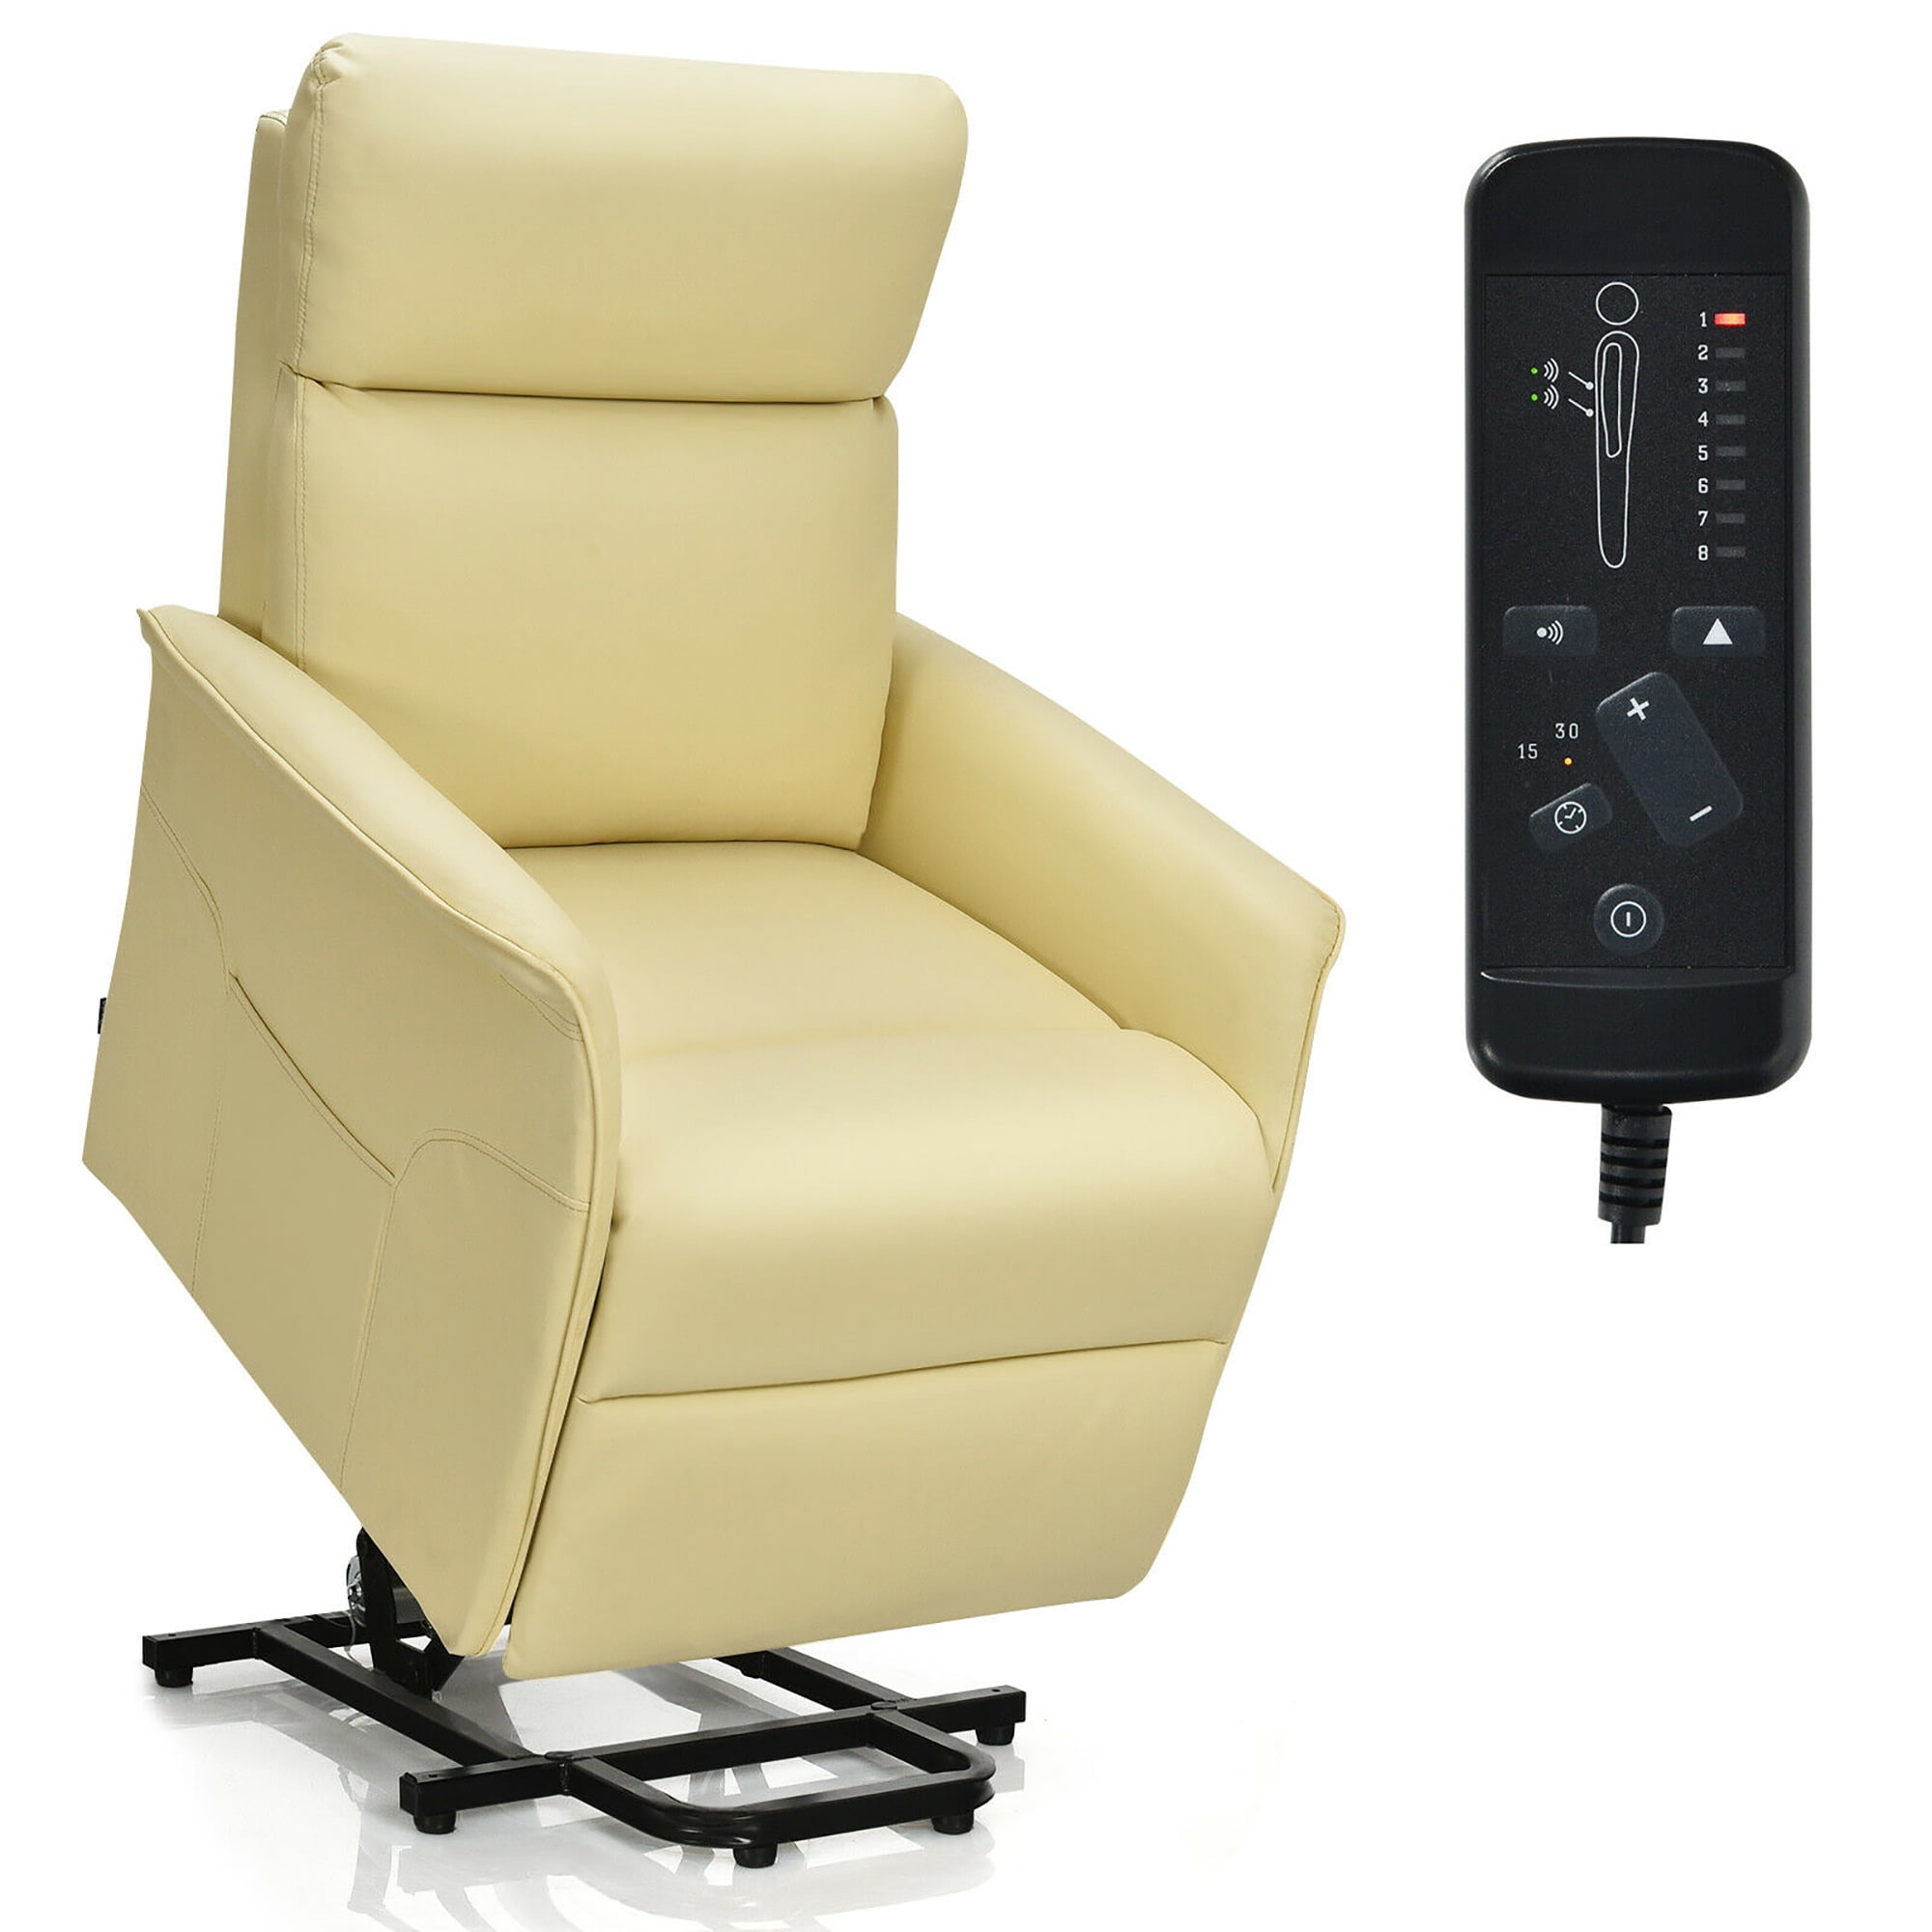 YOURLITE Electric Power Lift Recliner Chair Wireless Remote Control Massage Sofa for Senior Elderly Heated Vibration Massage Sofa with USB Port Faux Leather for Living Room/Bedroom/Media Room Brown